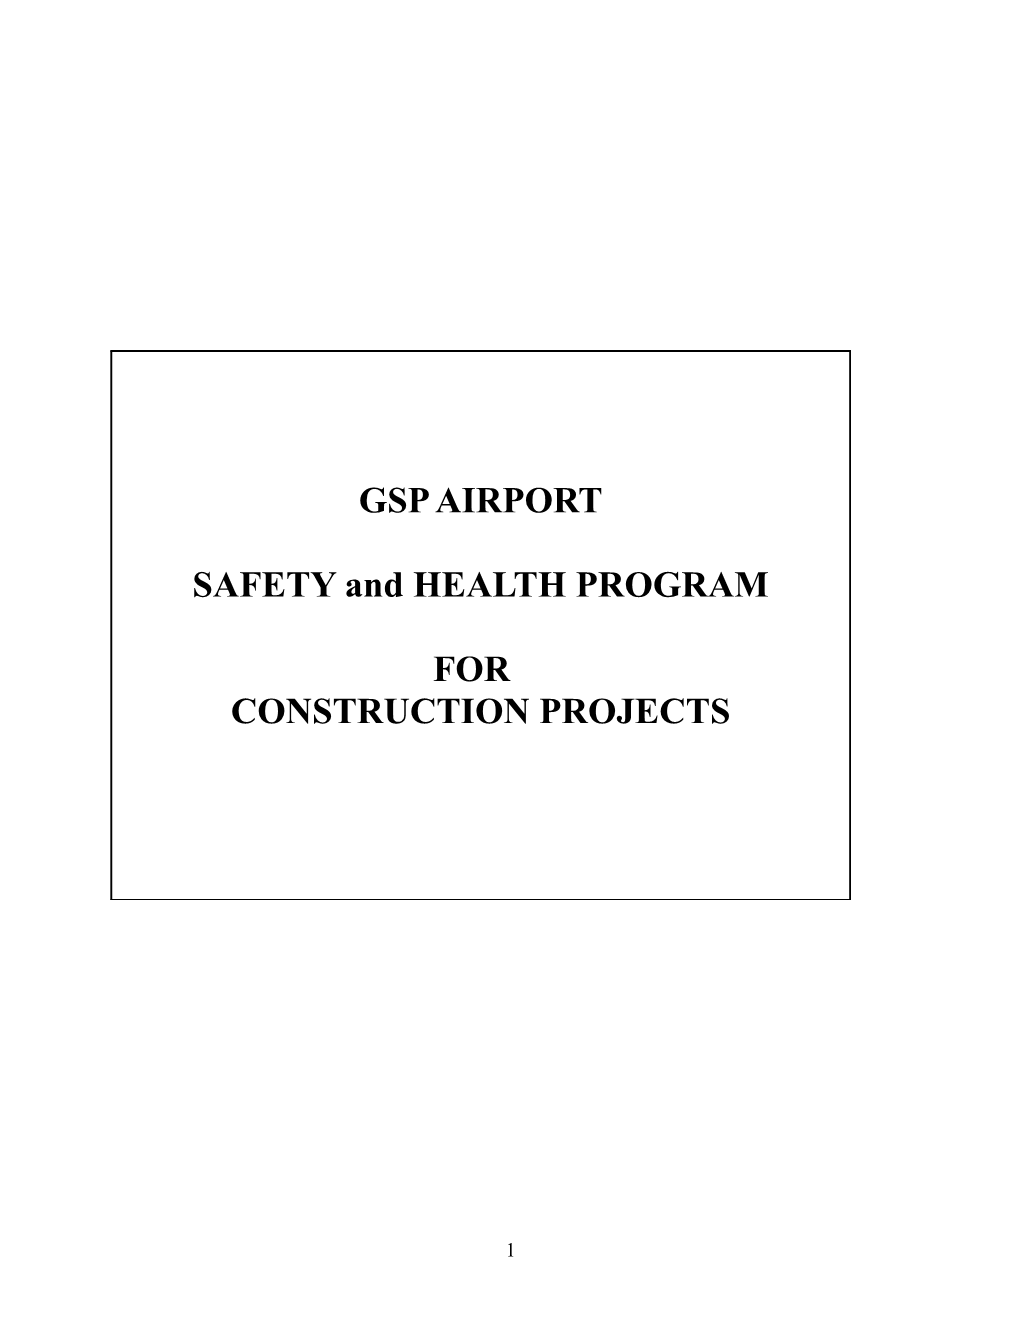 GSP Airport Safety Programs for Construction Projects 3